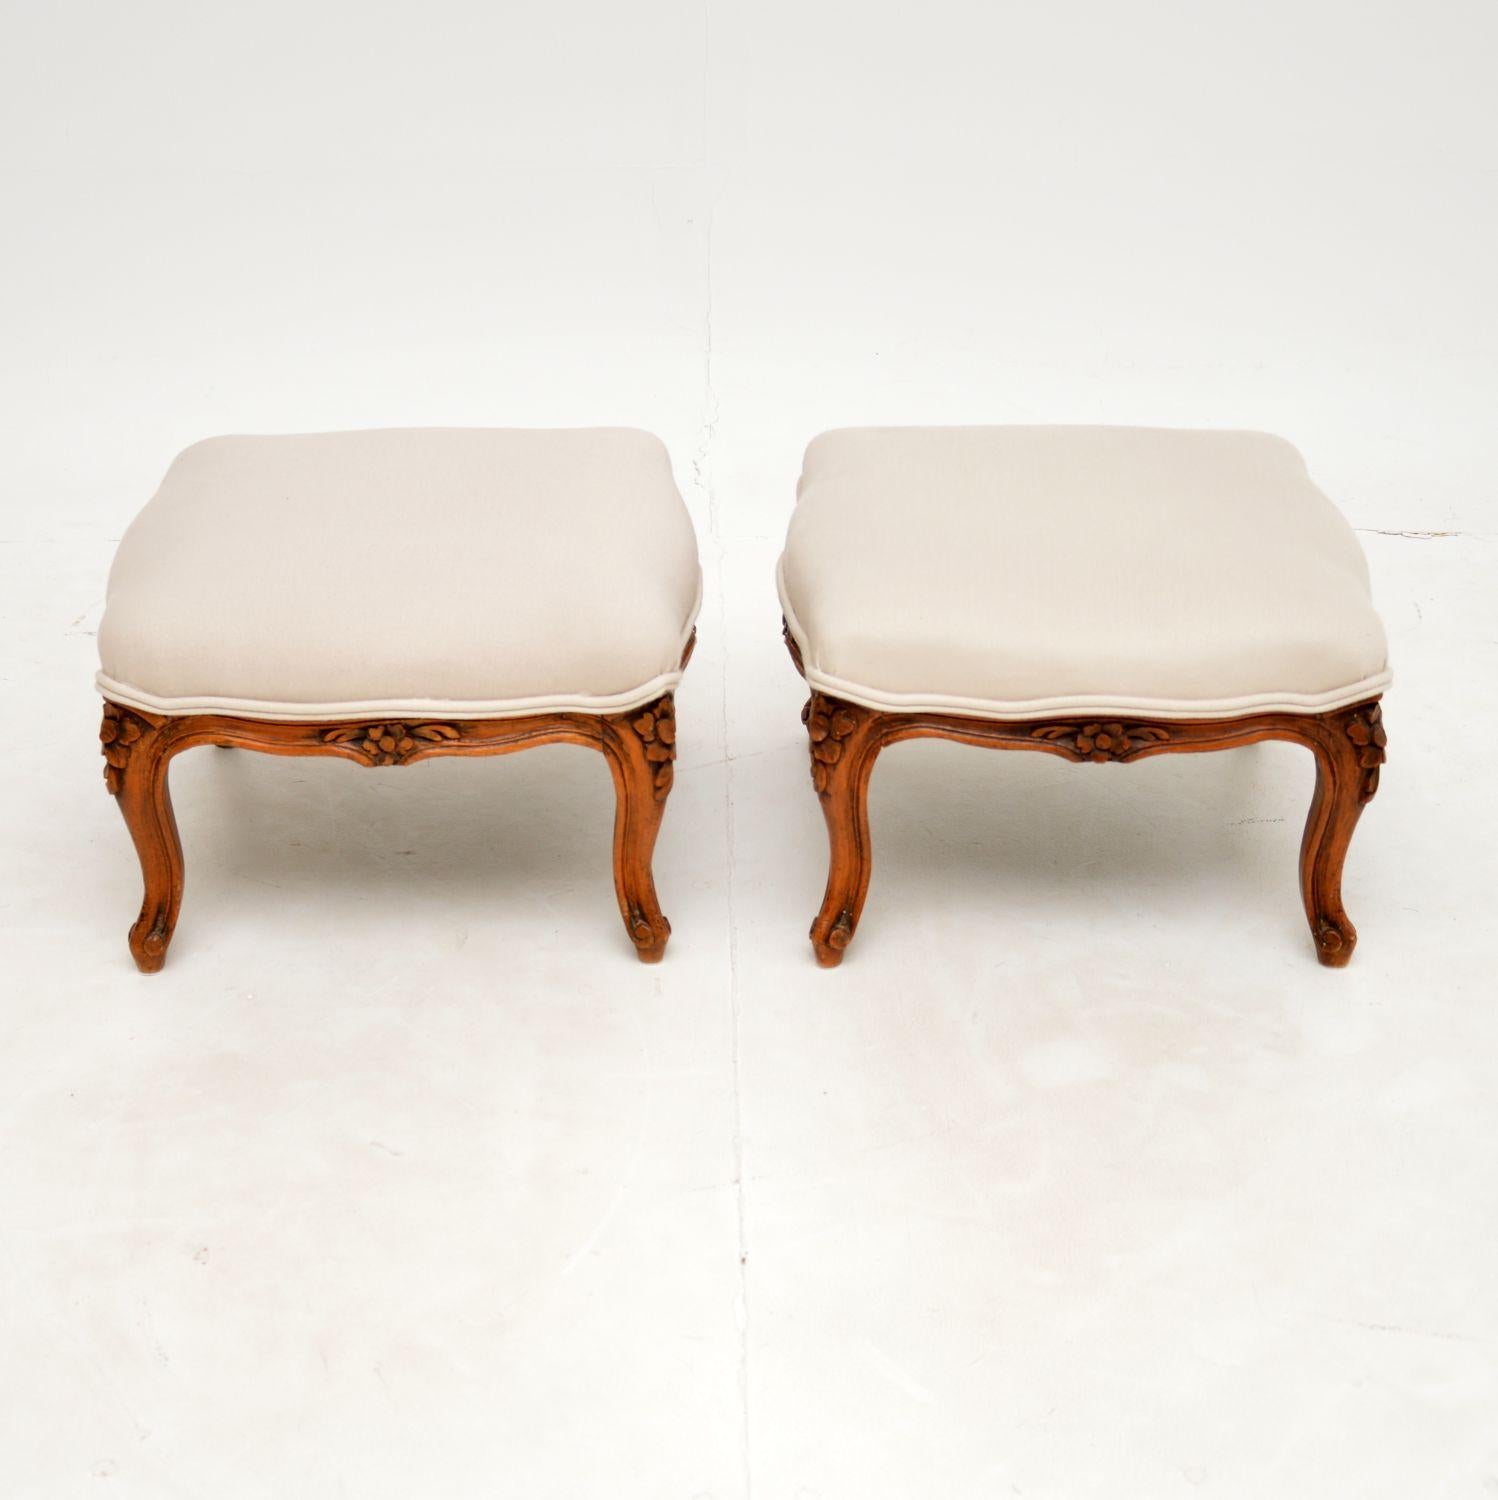 A beautiful pair of antique French foot stools in solid walnut, dating from around the 1930’s period.

They have a gorgeous design and are beautifully carved around the legs. The tops have serpentine edges and all sides are the same length.

We